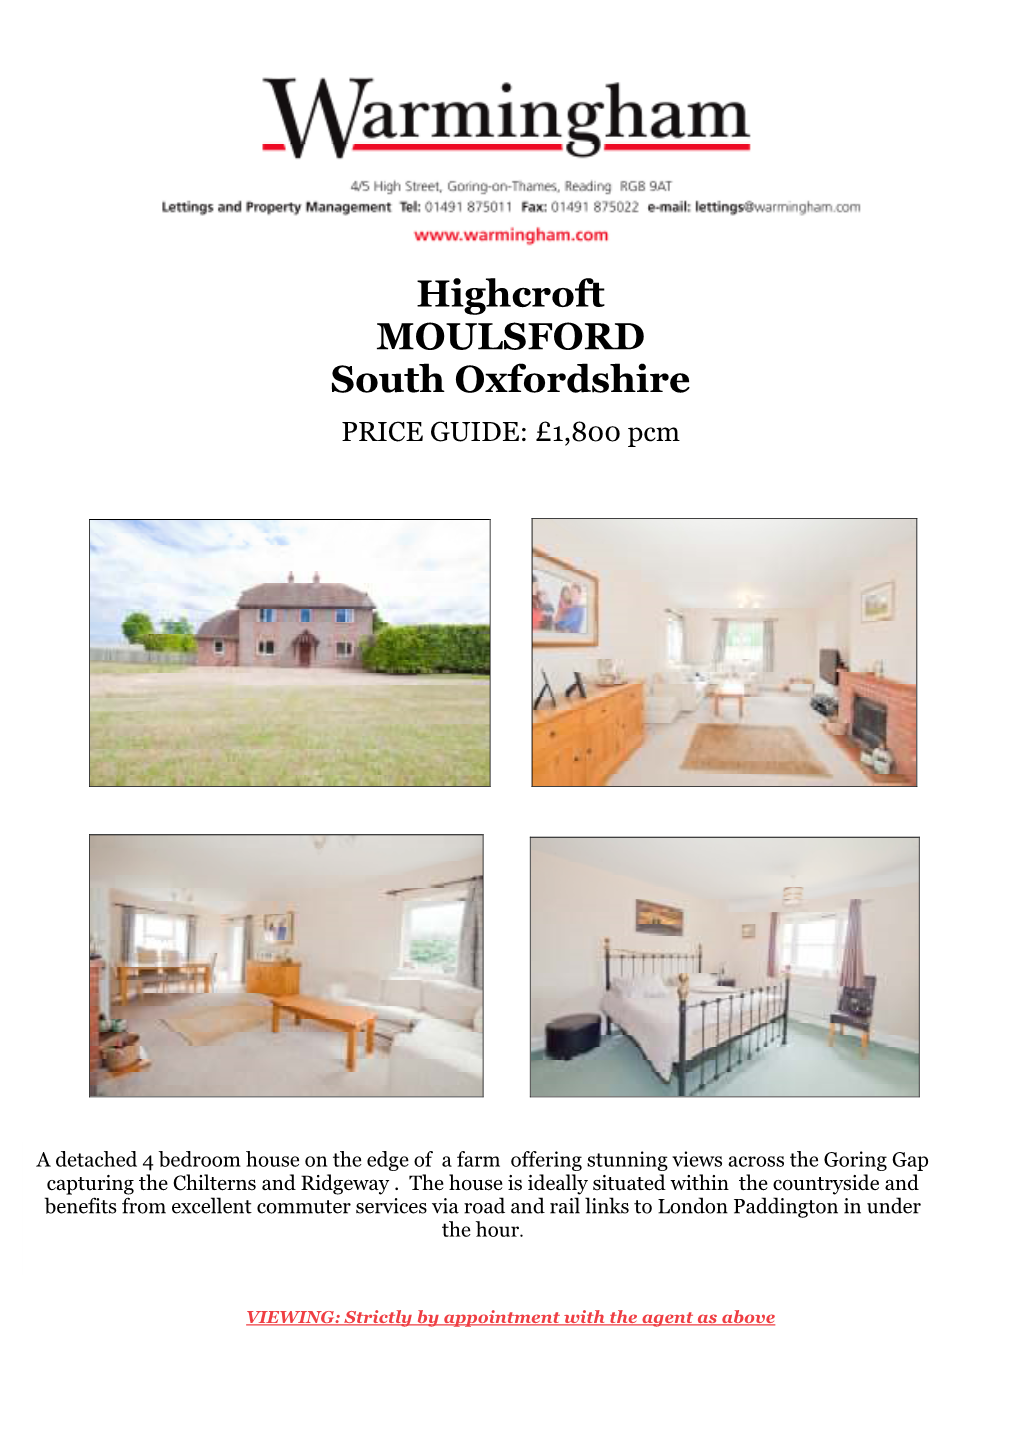 Highcroft MOULSFORD South Oxfordshire